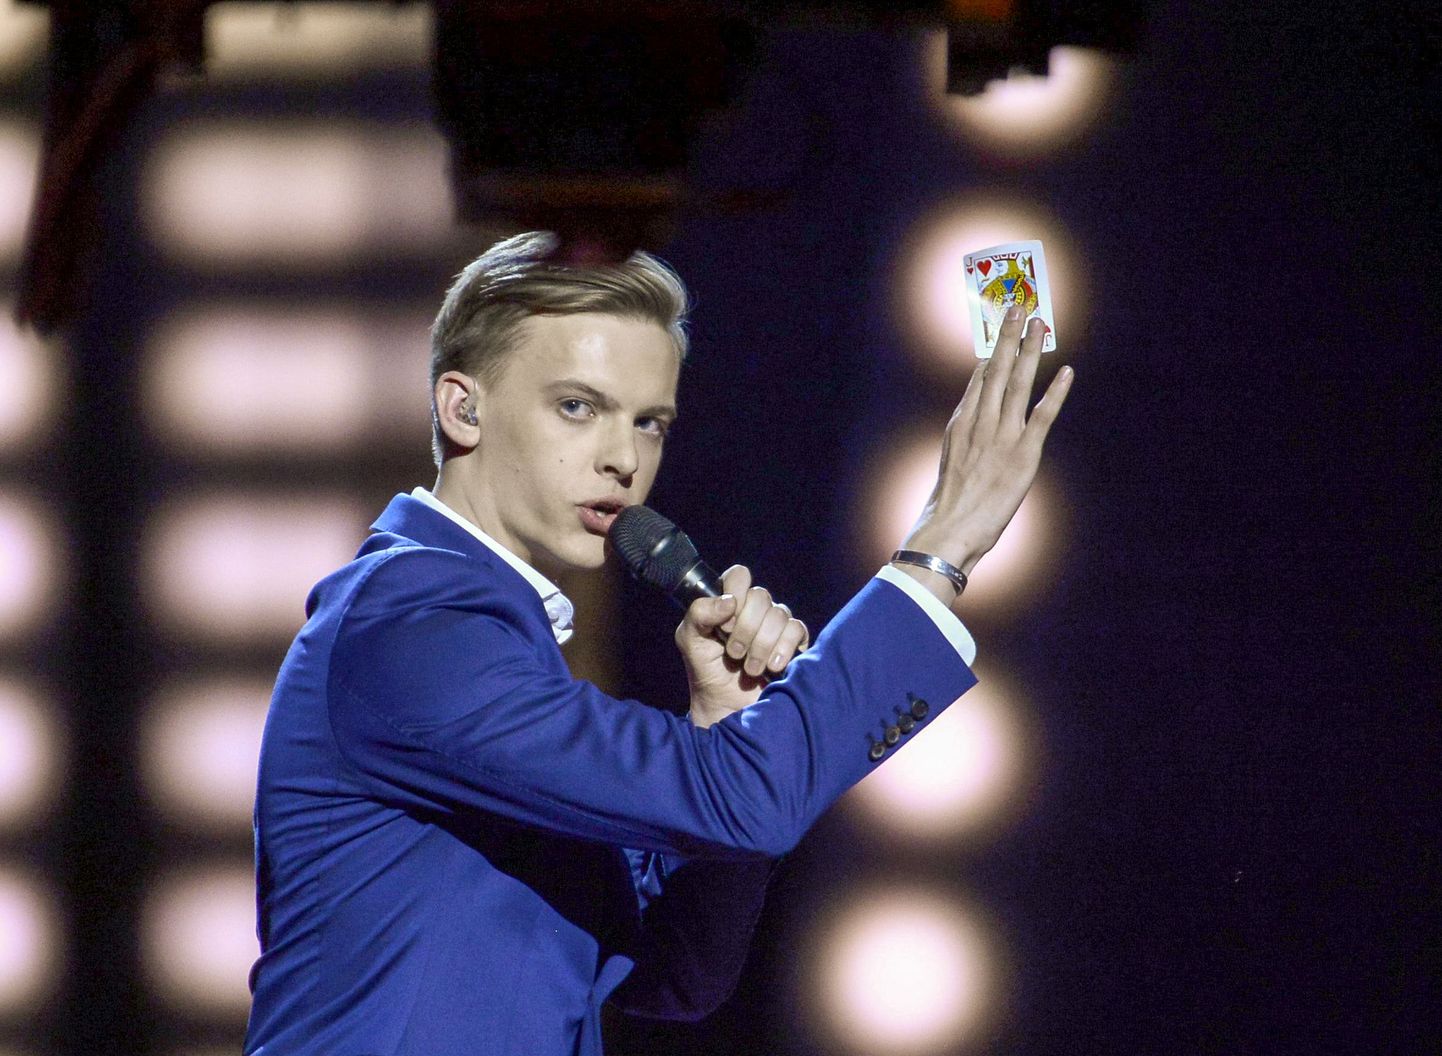 STOCKHOLM 2016-05-10
Estonia's Jüri Pootsmann performs with the song "Play" during the Eurovision Song Contest 2016 semi-final 1 at the Ericsson Globe Arena in Stockholm, Sweden, May 10, 2016. 
Photo: Maja Suslin / TT / Kod 10300
** SWEDEN OUT **